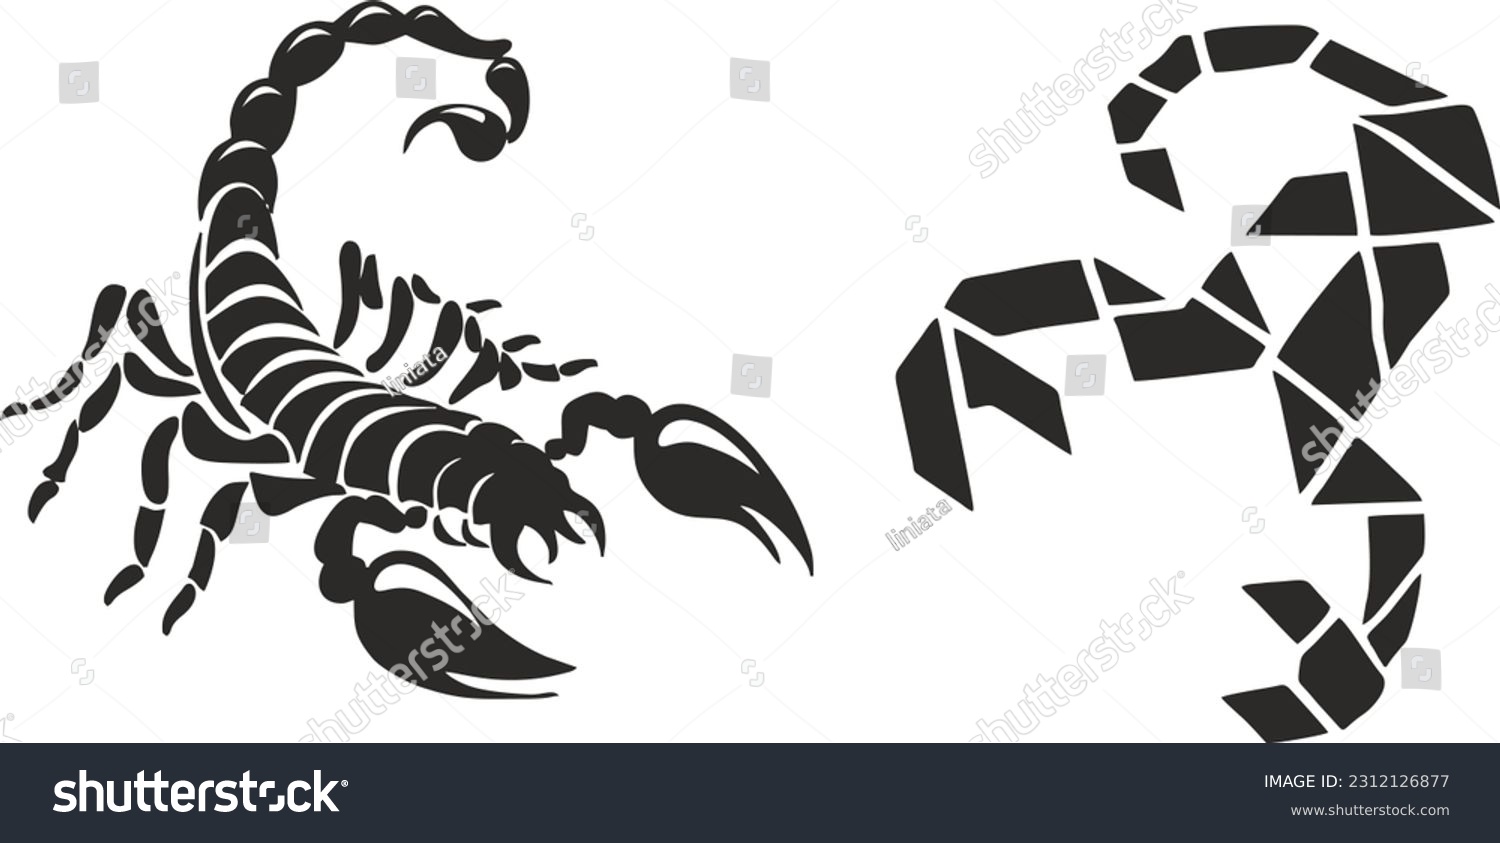 SVG of Scorpion vector, realistic and abstract modern scorpion drawing printable for tattoos and shirt prints, adjustable black scorpion with long tails, geometric scorpion motif, scorpio horoscope svg